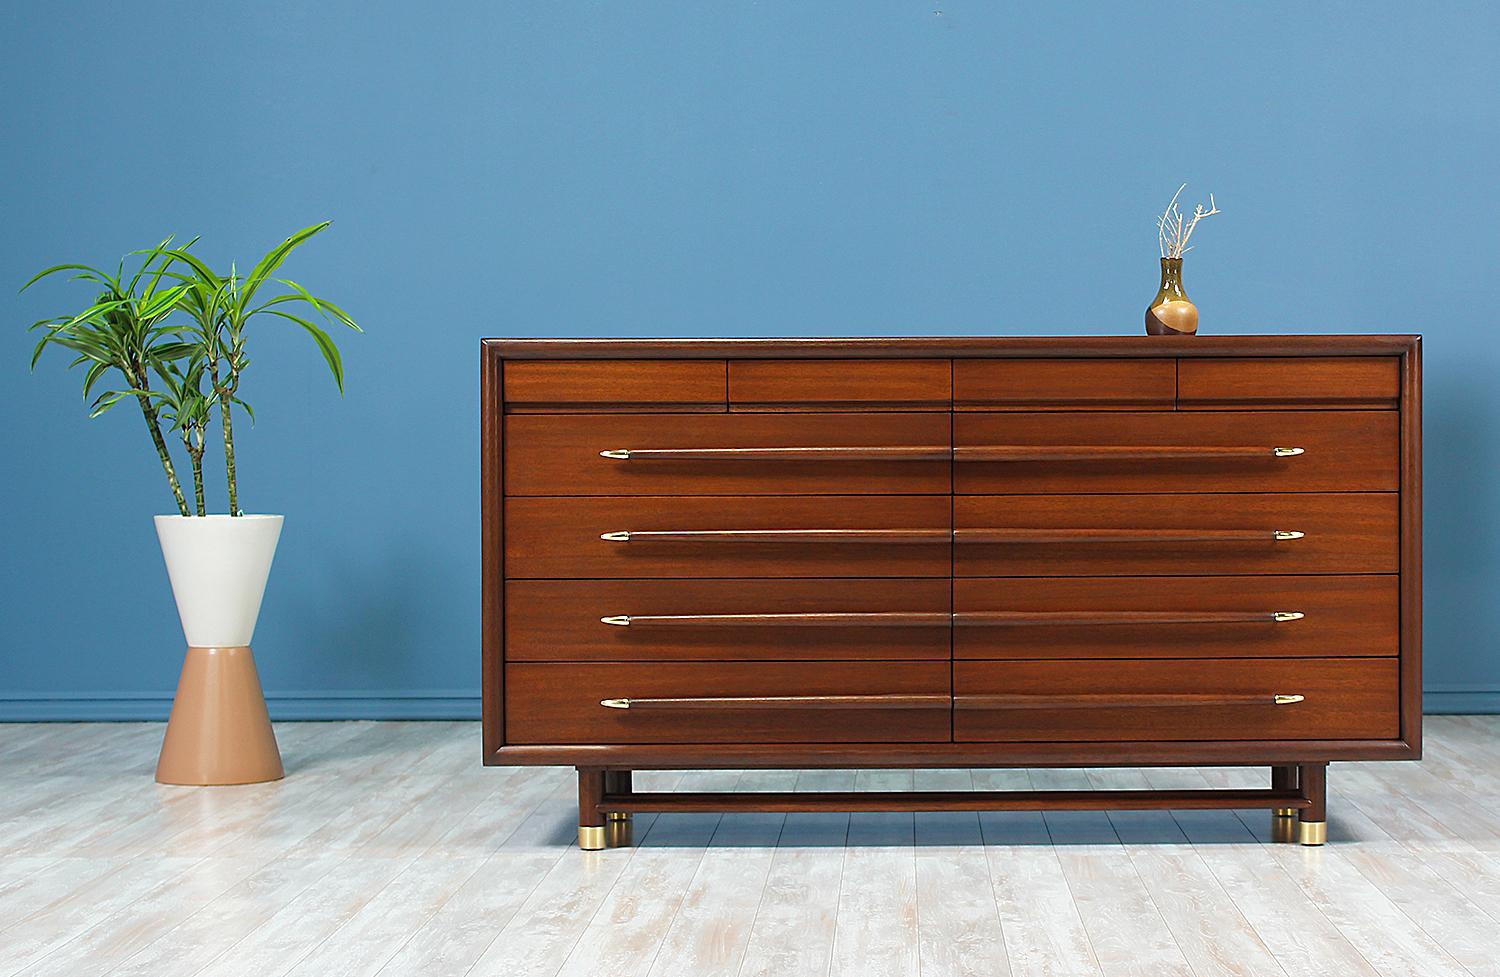 Designer: by John Keal
Manufacturer: Brown Saltman
Country of origin: United States
Date of manufacture: 1950-1959
Materials: Walnut-stained mahogany wood, brass accents
Period style: Mid-Century Modern

Condition: Excellent
Extra